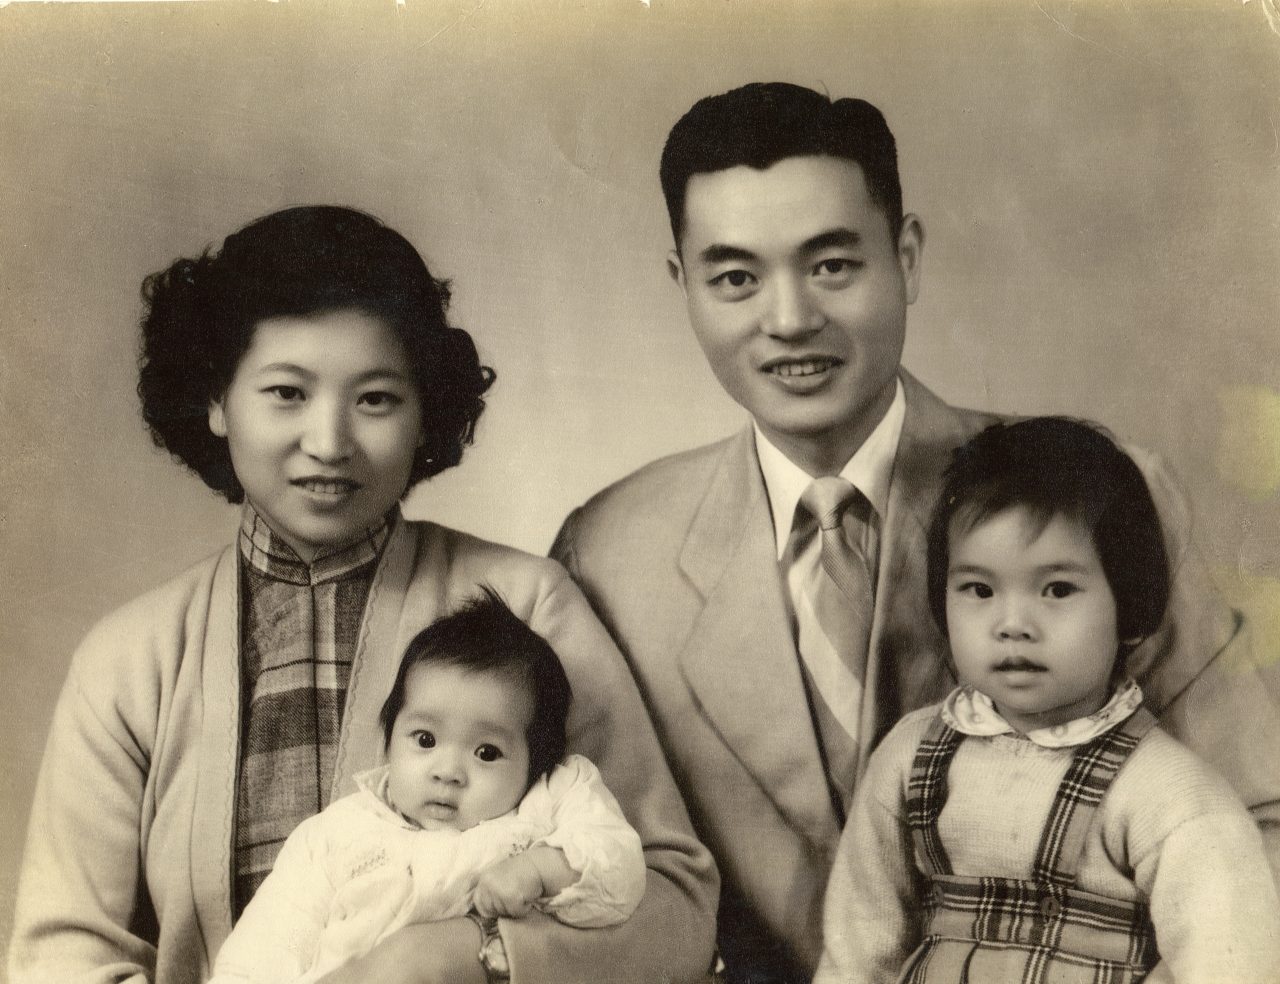 Future U.S. Secretary of Labor and Transportation Elaine L. Chao with her parents Dr. and Mrs. James S. C. Chao and sister Jeanette.